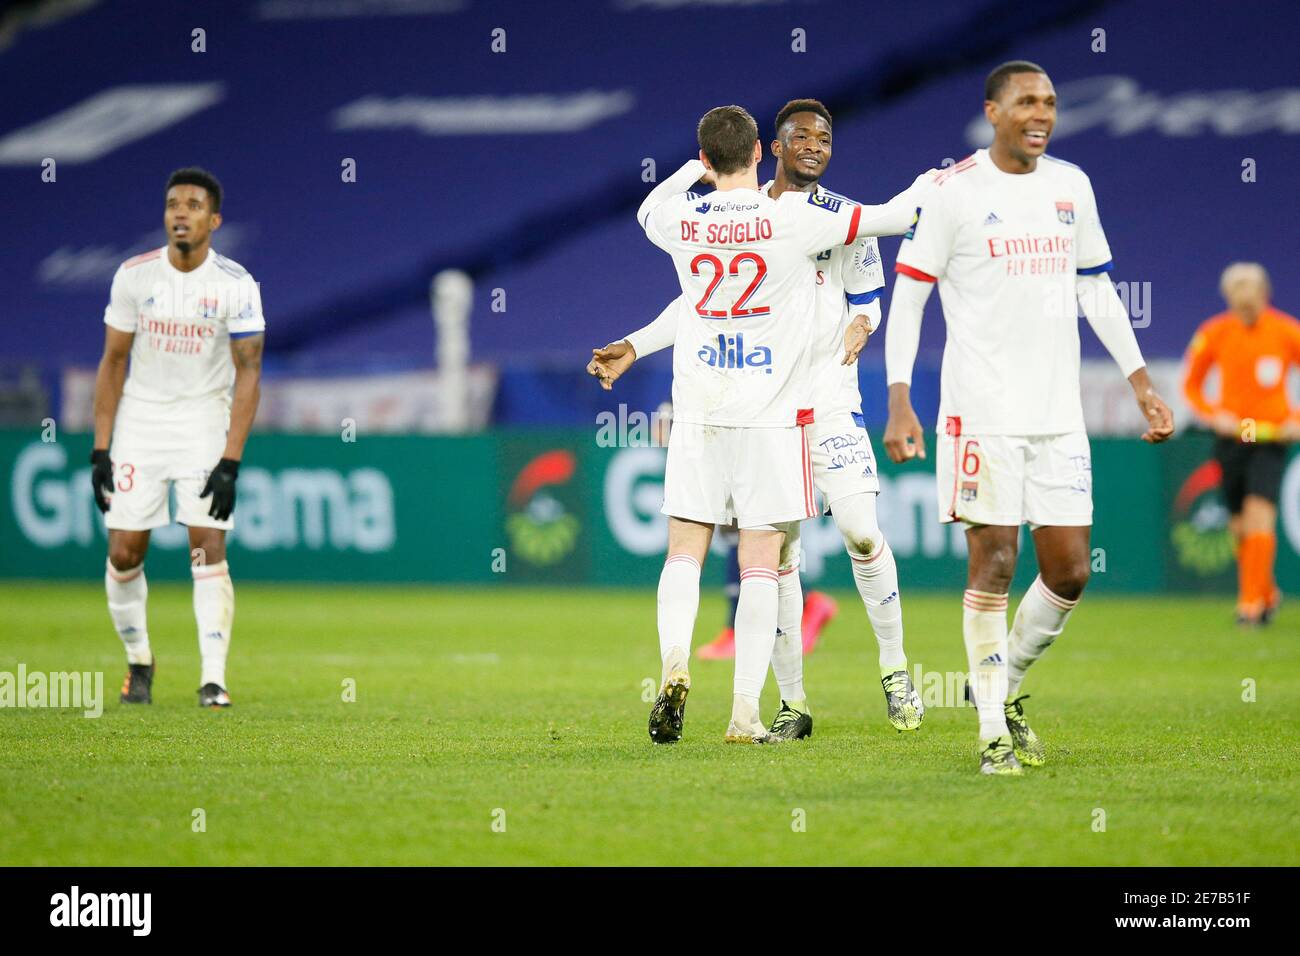 Olympique Lyonnais players celebrate victory after the match during Ligue 1  Olympique Lyon vs FC Girondins de Bordeaux football match at Groupama  Stadium in Lyon, France, January 29, 2021. Photo by Emmanuel